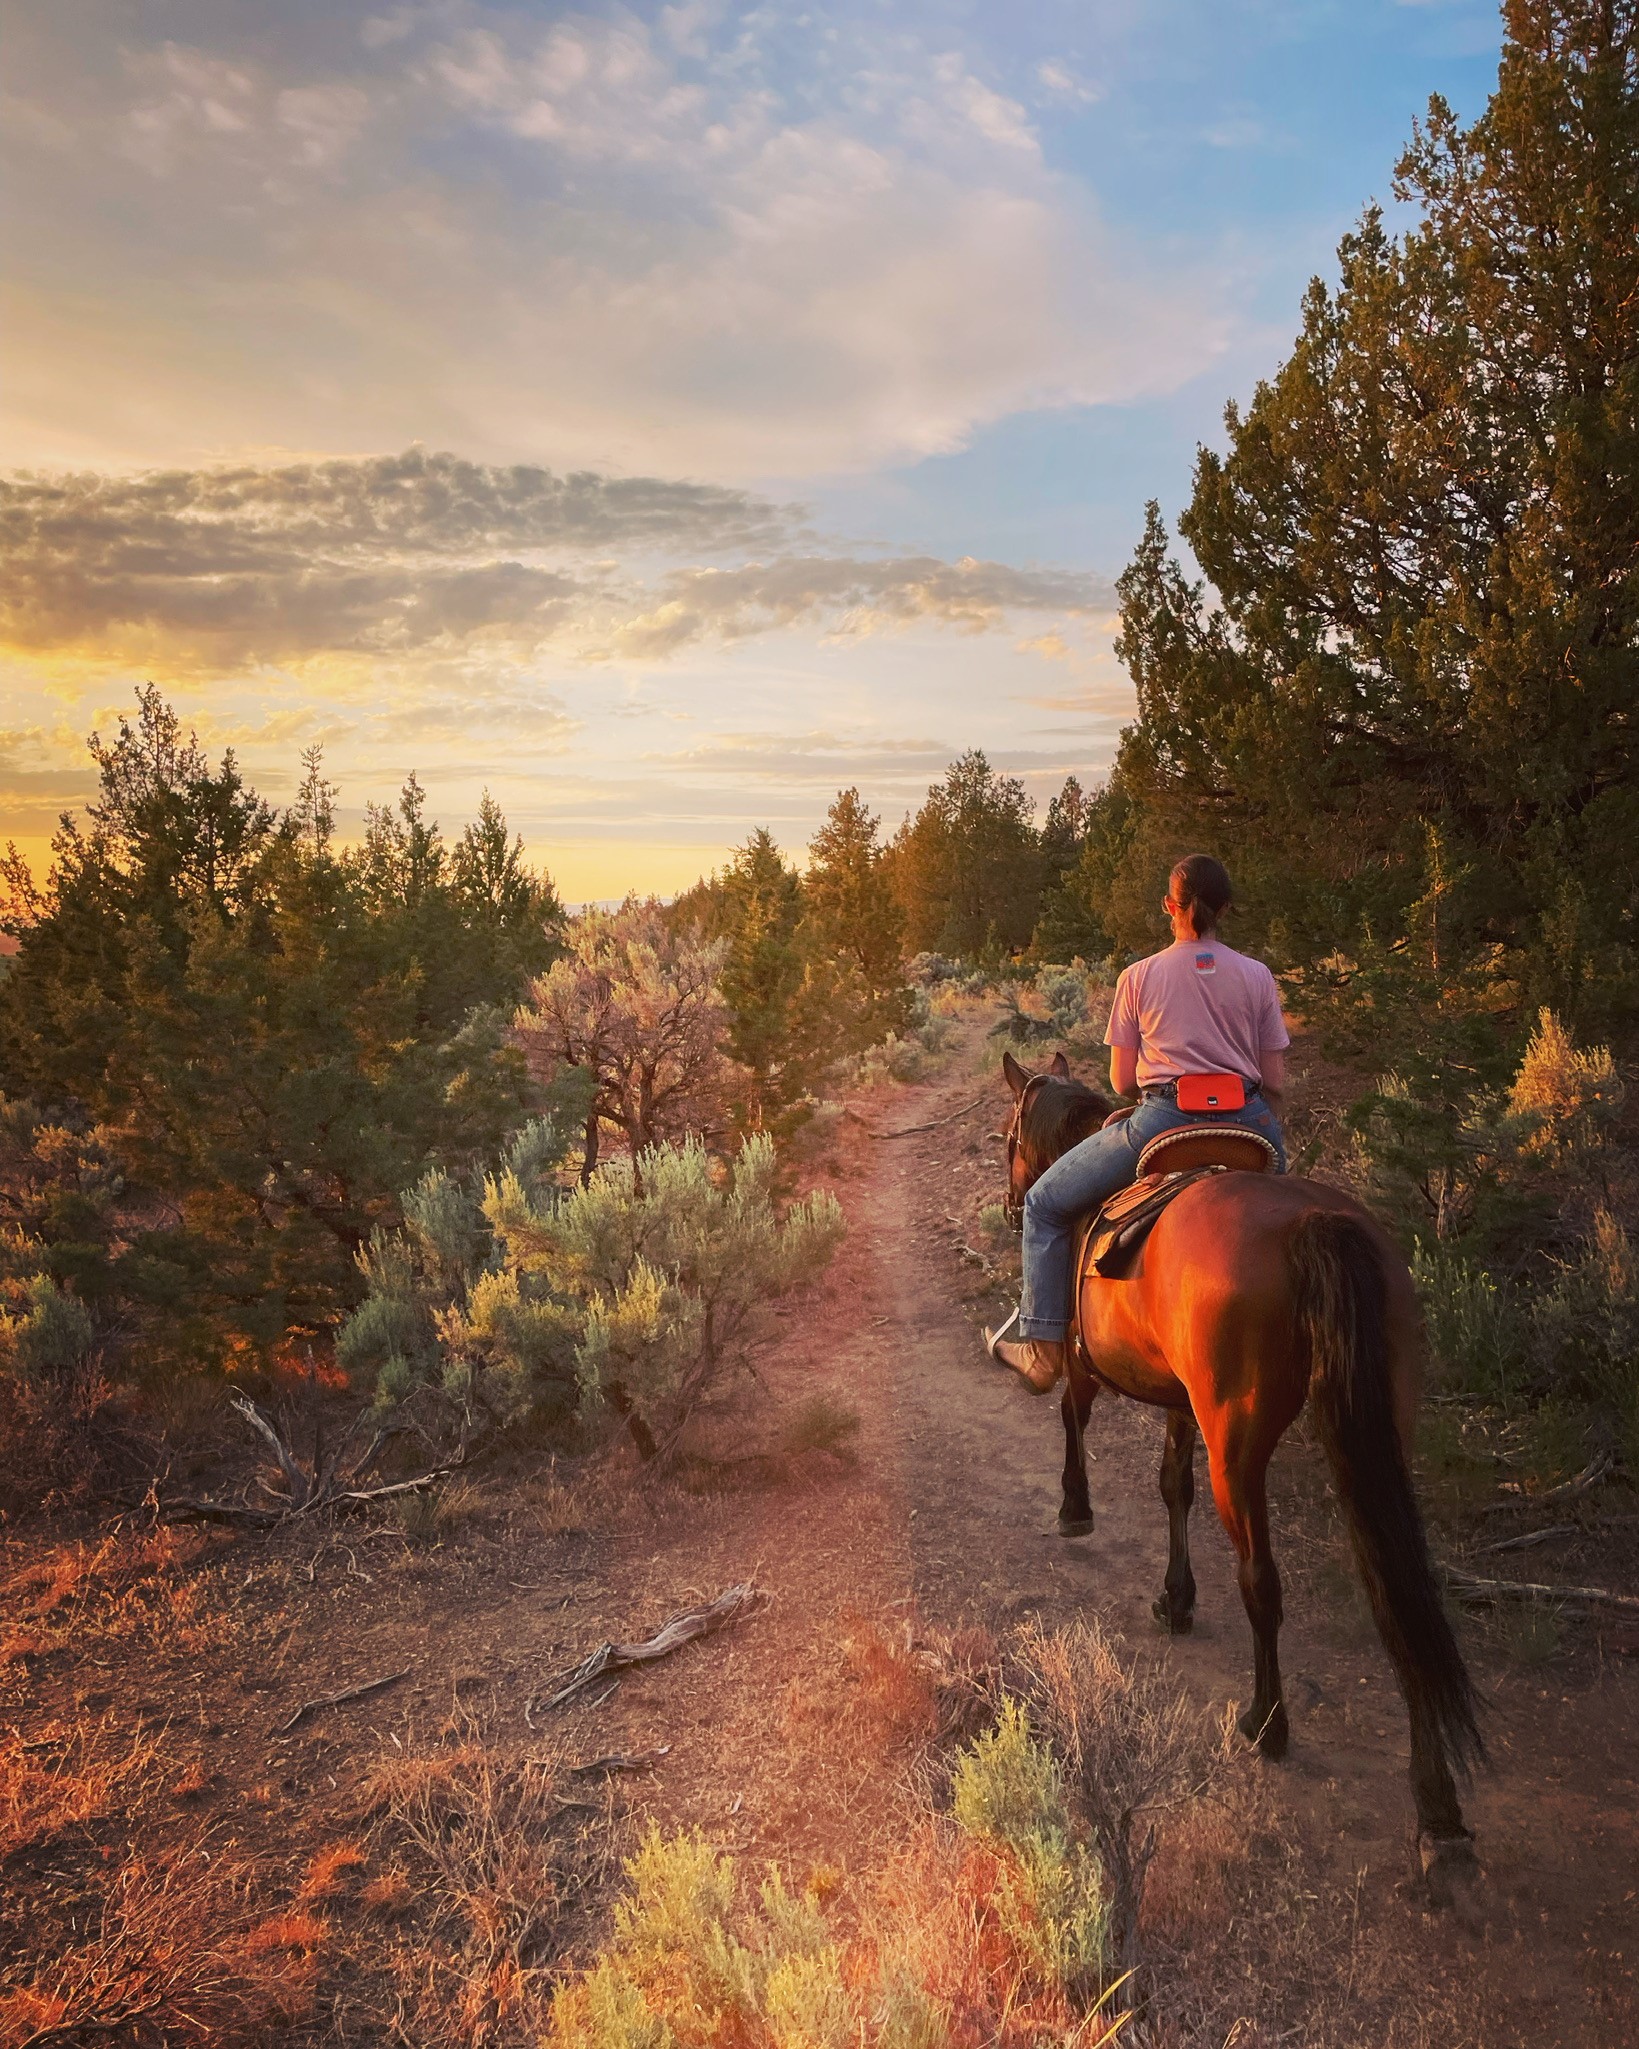 Madras trails, featuring person riding a horse, facing away from the camera, riding into the sunset. 